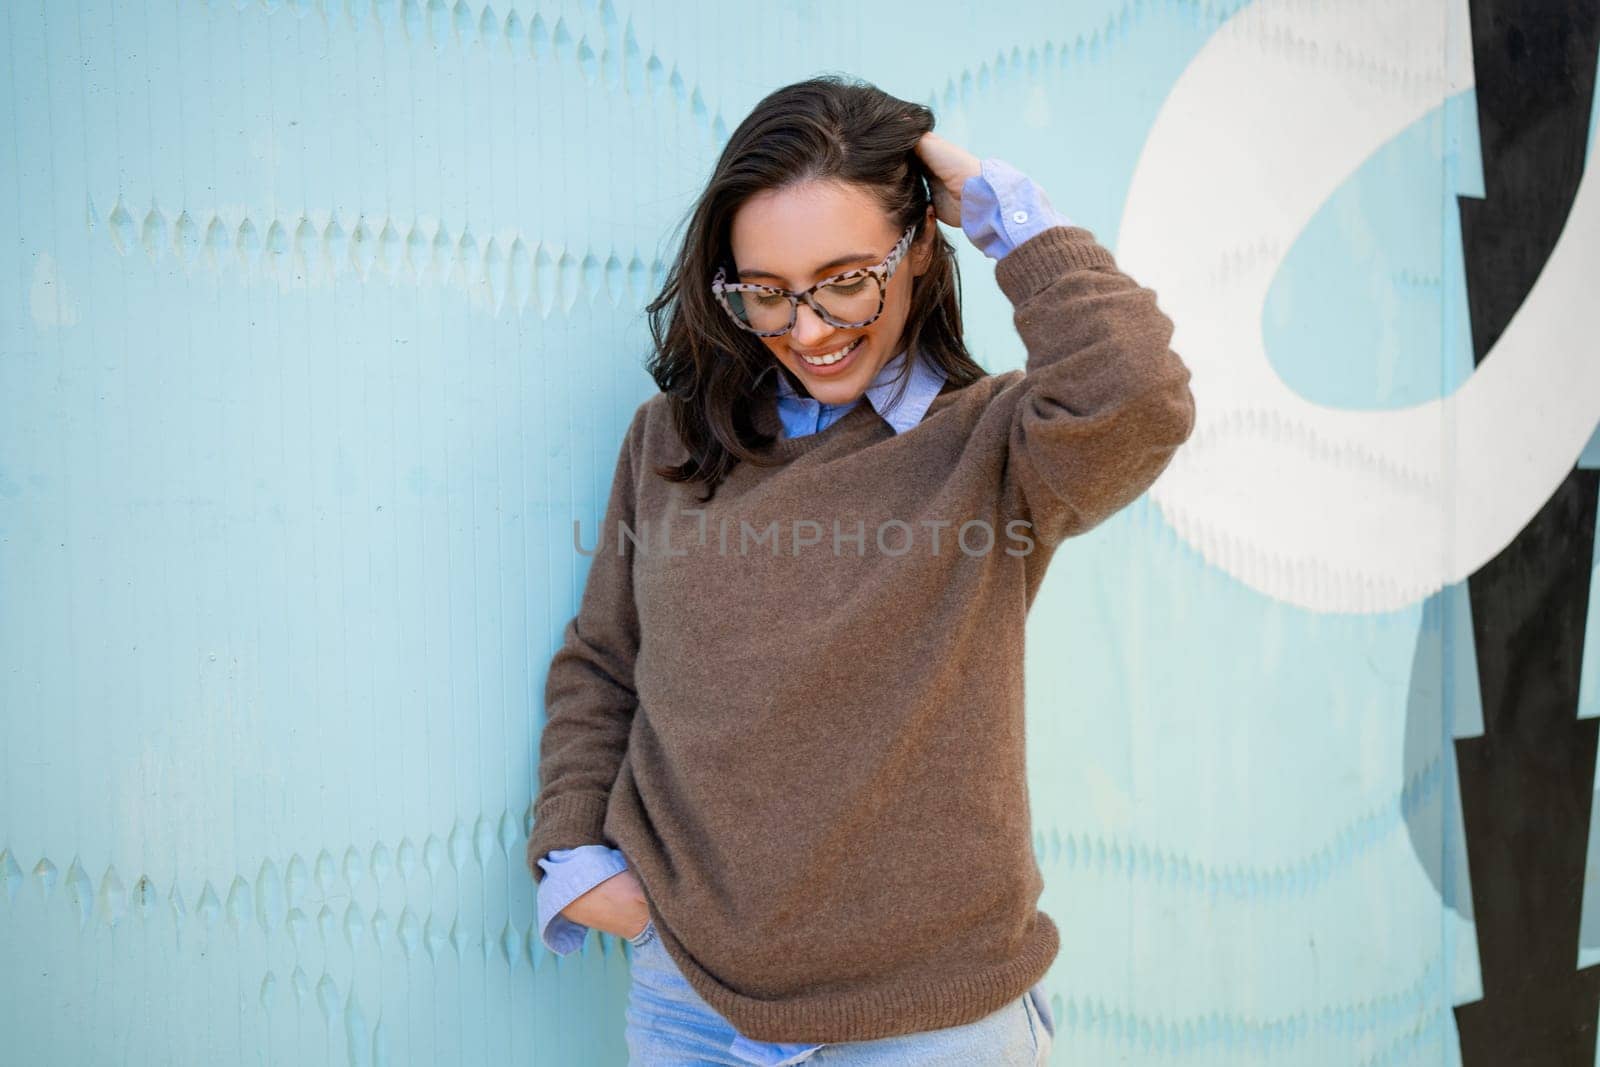 Happy woman in glasses outdoor on blue color background. Positive people concept. Smiling girl looking down, touching hair, hands in pocket, dressed sweater and jeans. Vertical full length